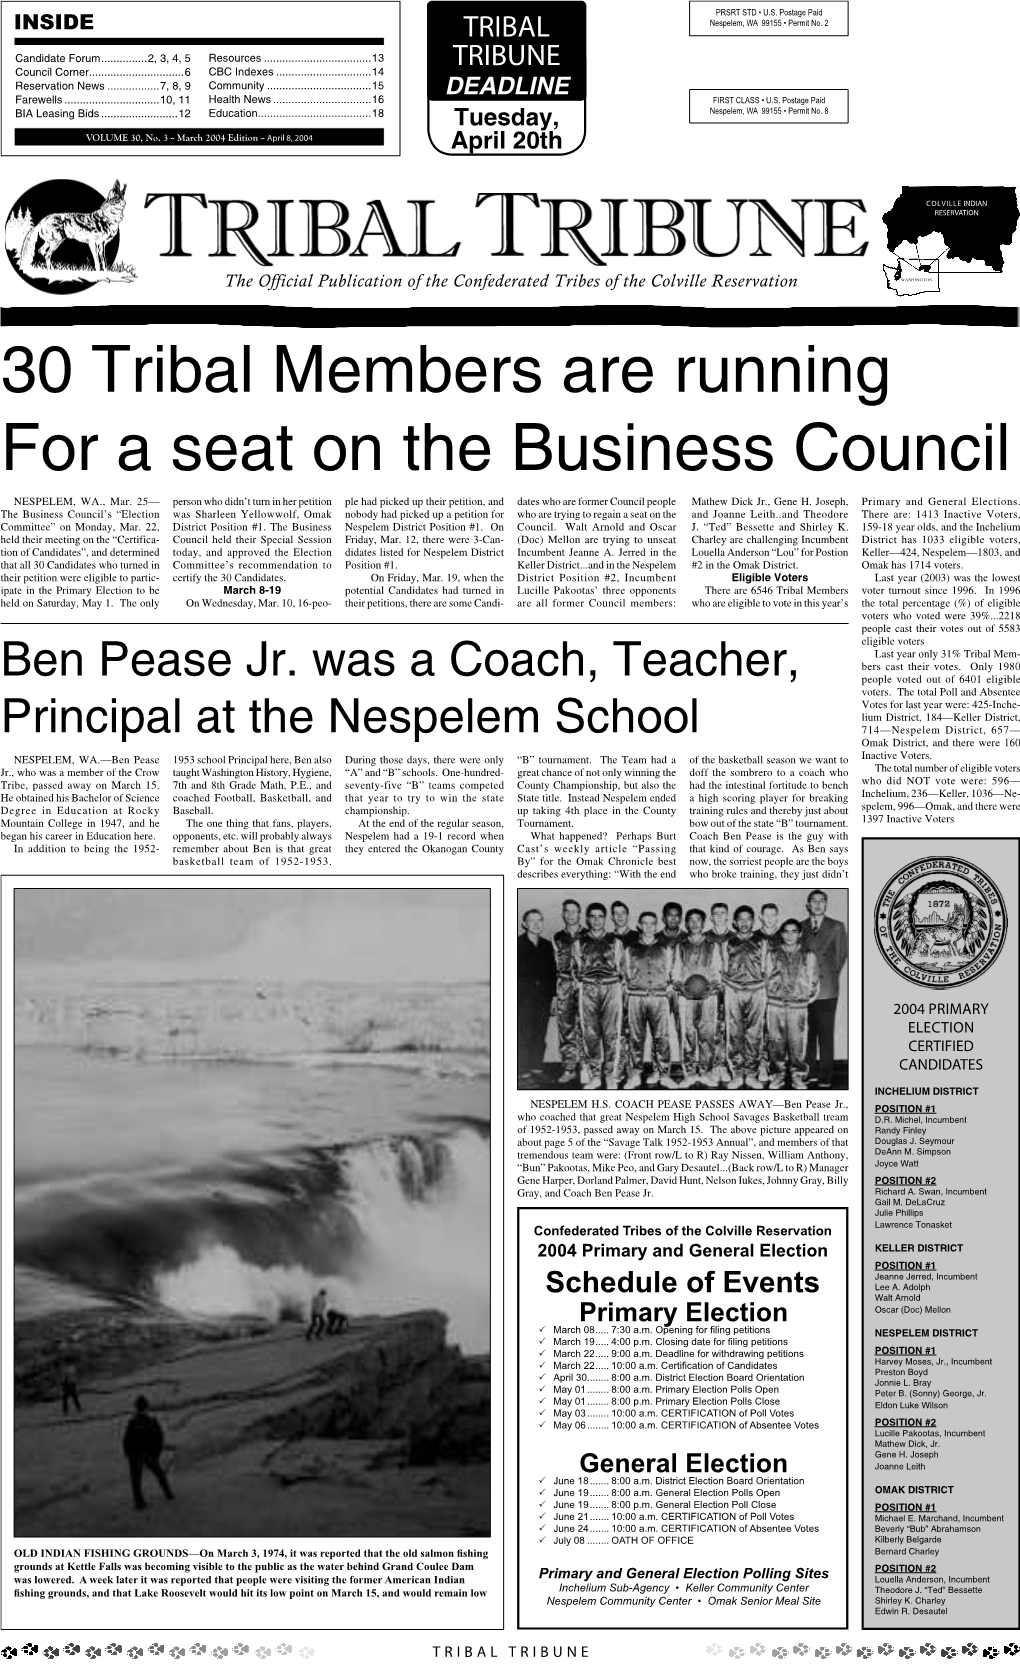 30 Tribal Members Are Running for a Seat on the Business Council